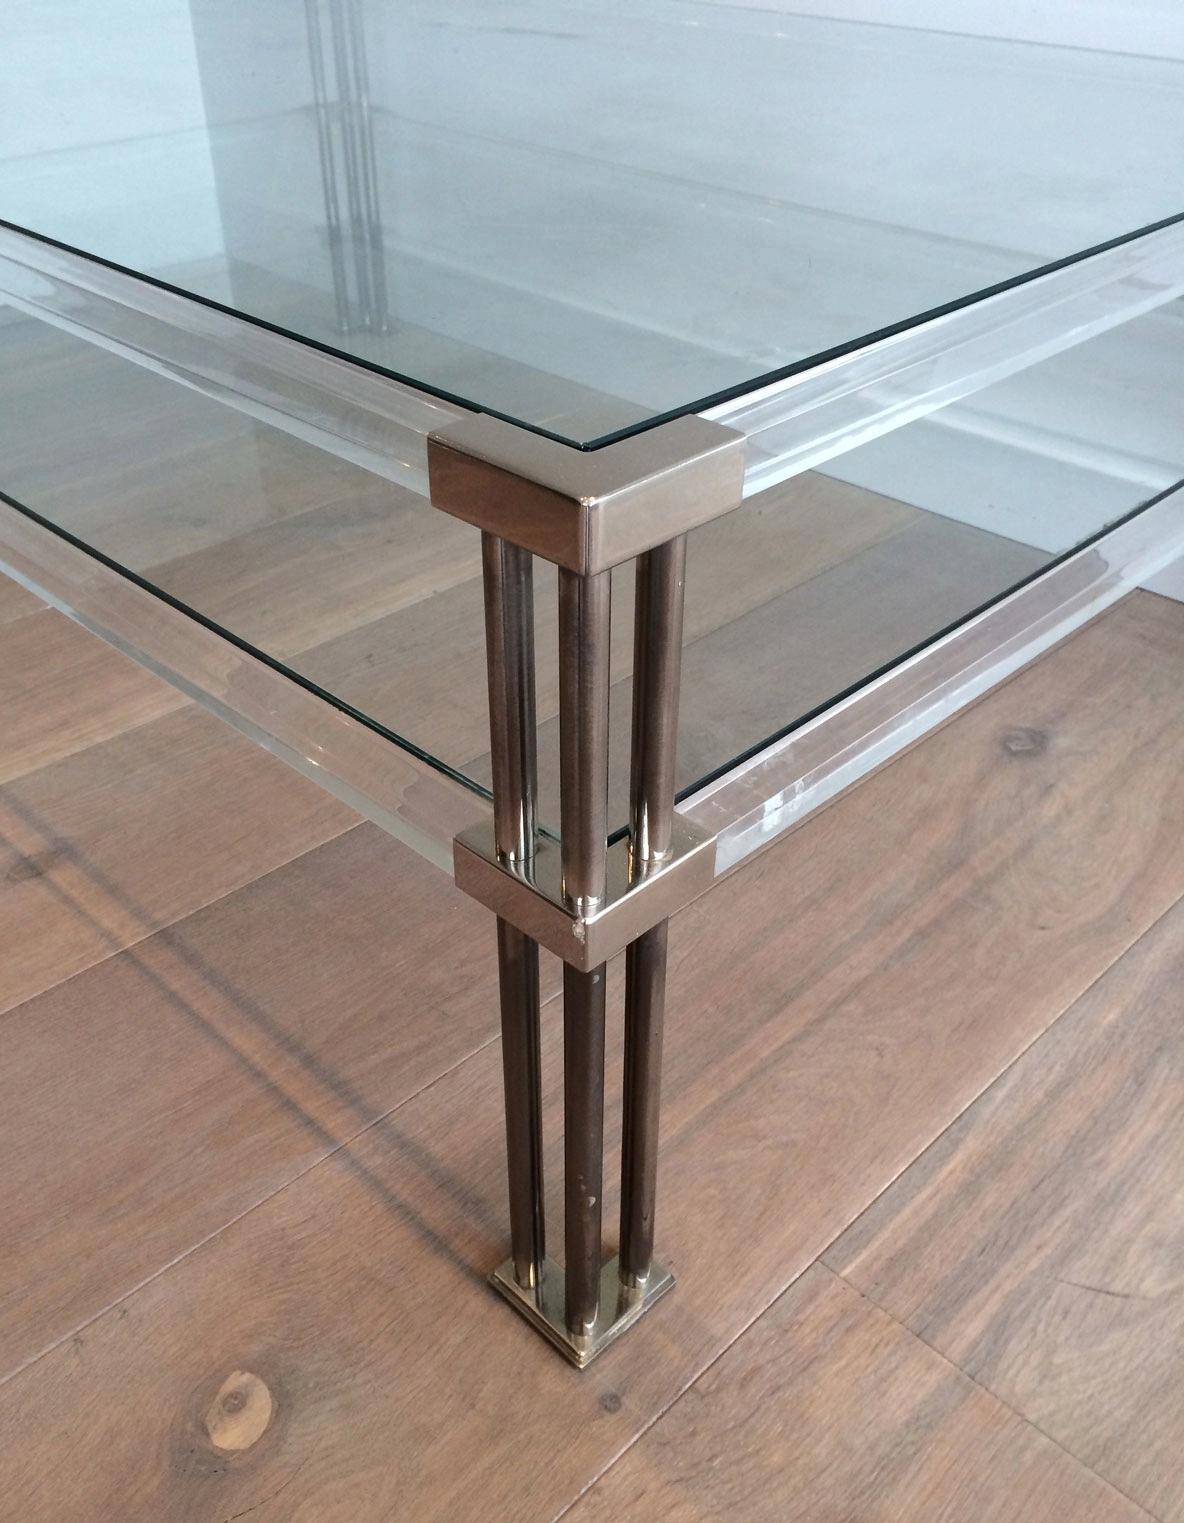 Late 20th Century Large Modernist Chrome and Lucite Coffee Table, French, circa 1970